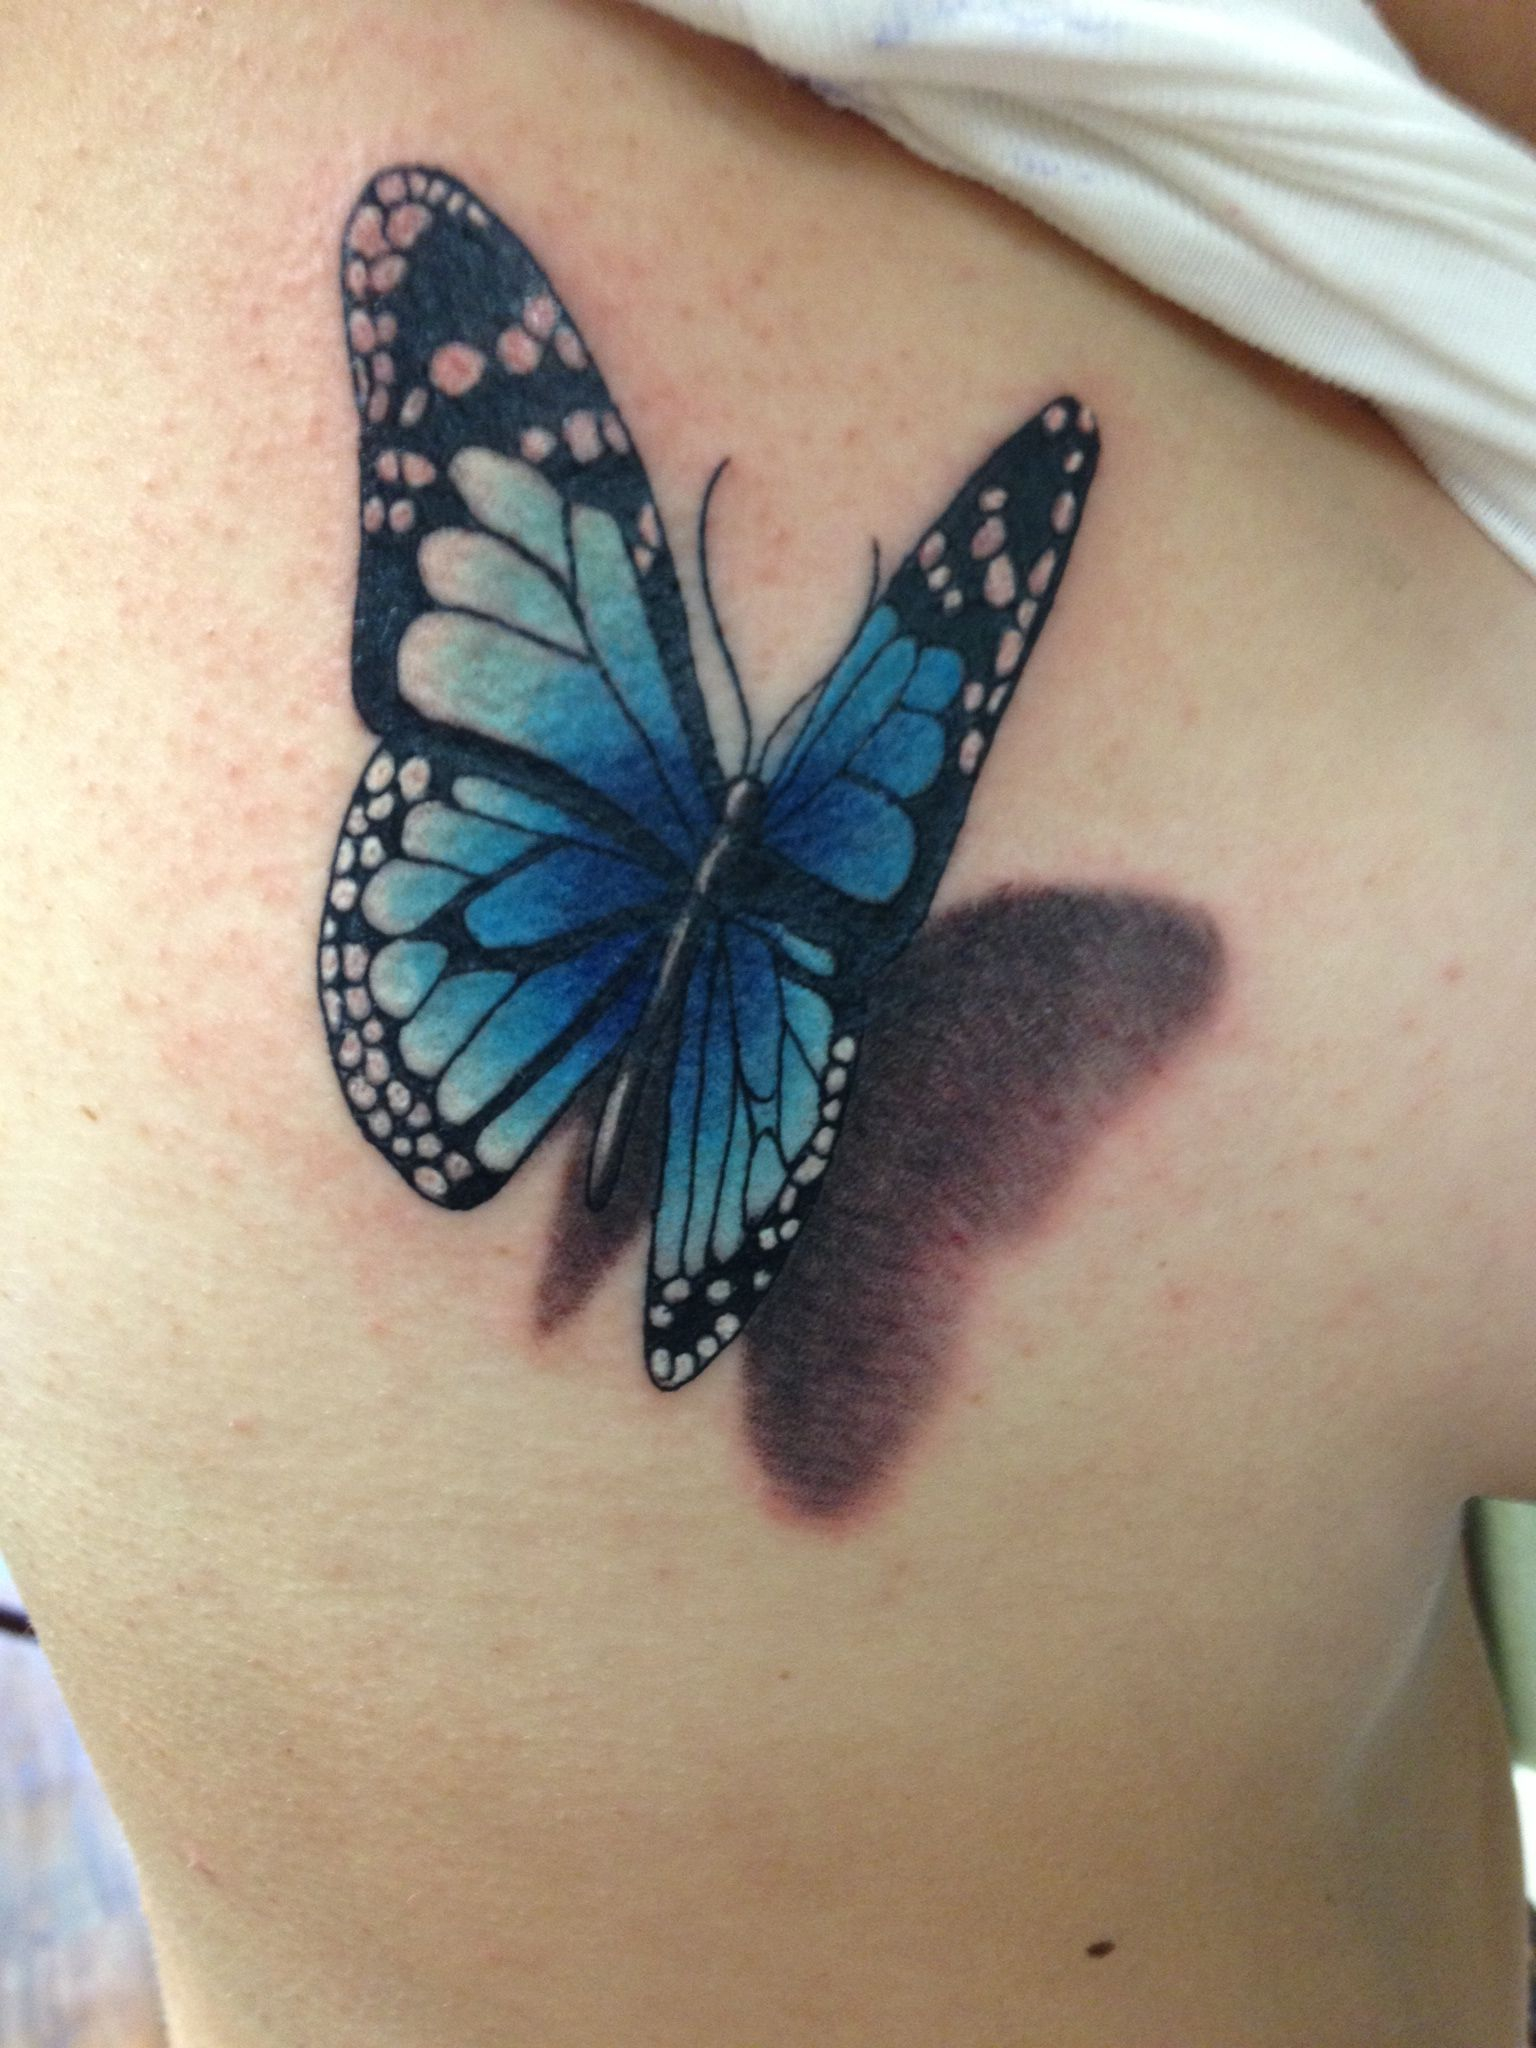 3d Butterfly Tattoo Courtesy Of Chris At Pretty In Ink Roseville Ca intended for sizing 1536 X 2048